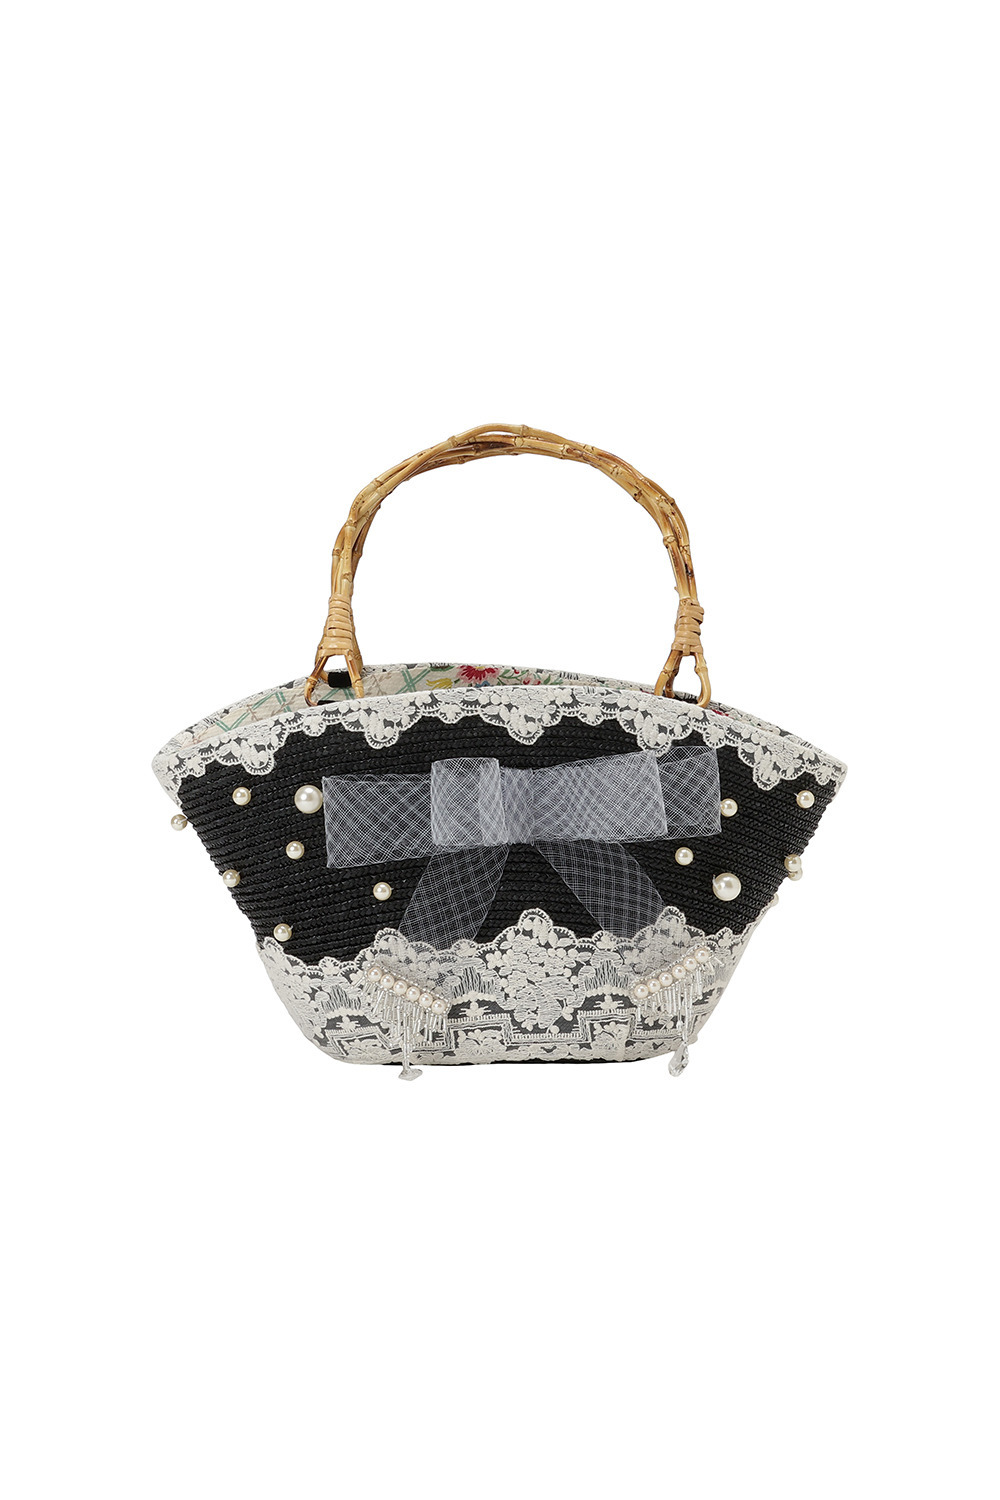 Pearl couture basket バッグ 詳細画像 マルチ